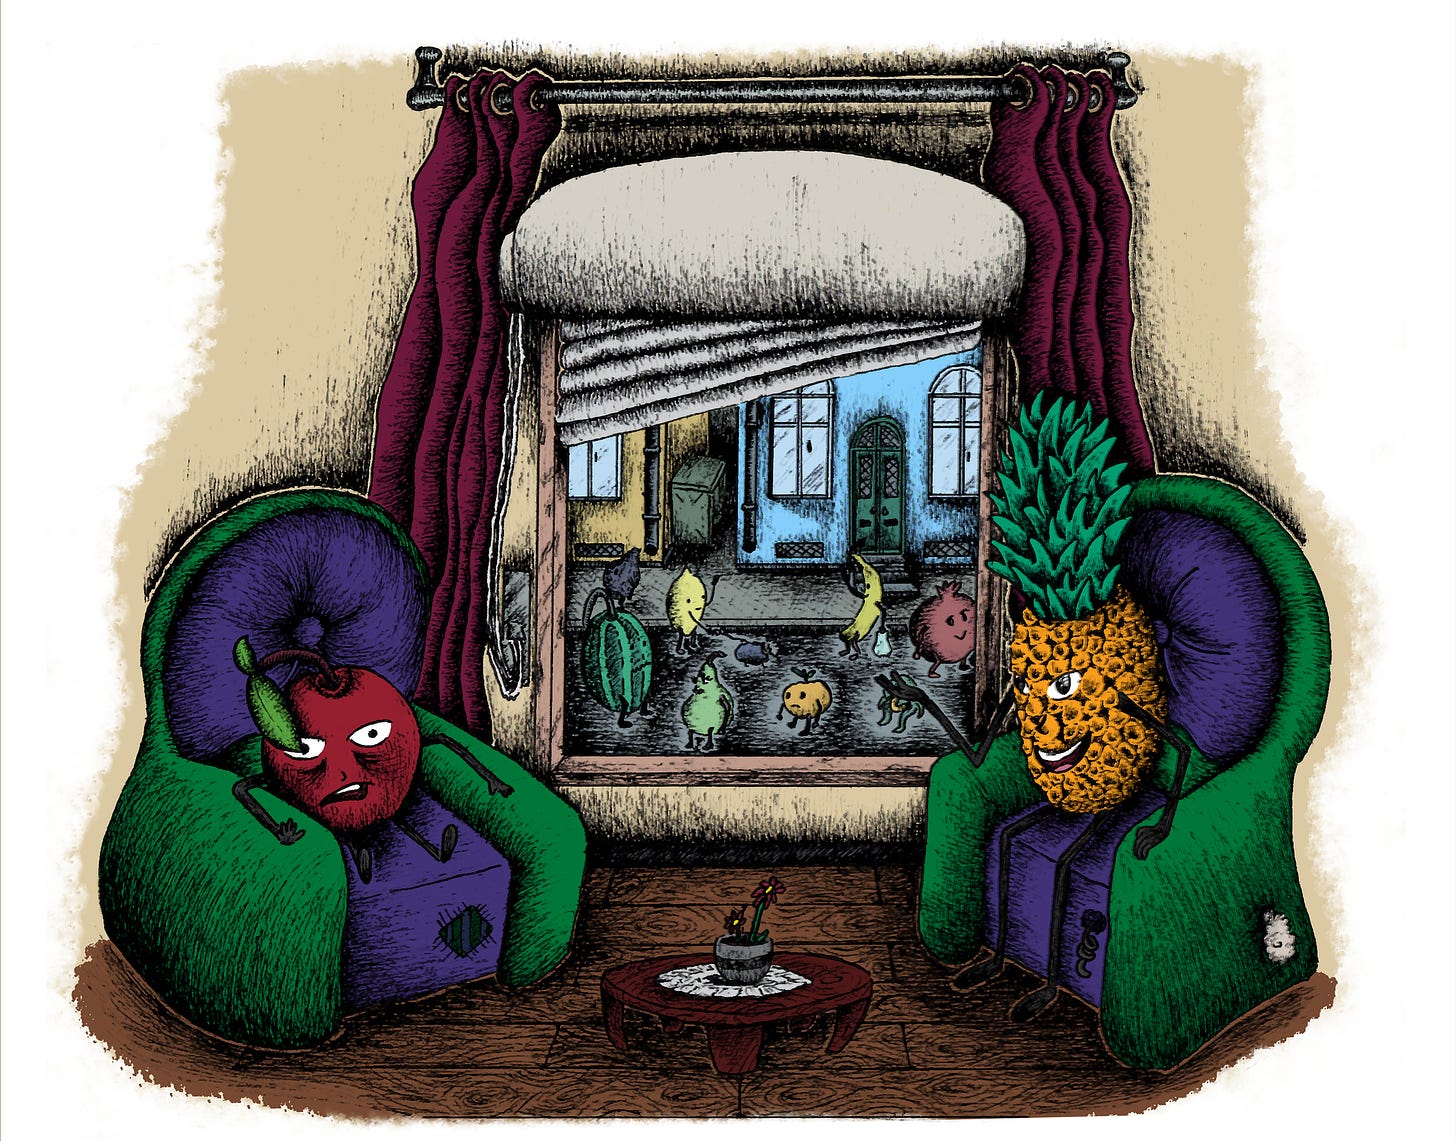 A bright illustration of an apple and pineapple sitting on green and purple chairs, facing each other. It looks like a therapy session. The apple looks depleted and the pineapple looks friendly and warm. There is a window with a view of a lively street scene and little fruit people walking around outside.